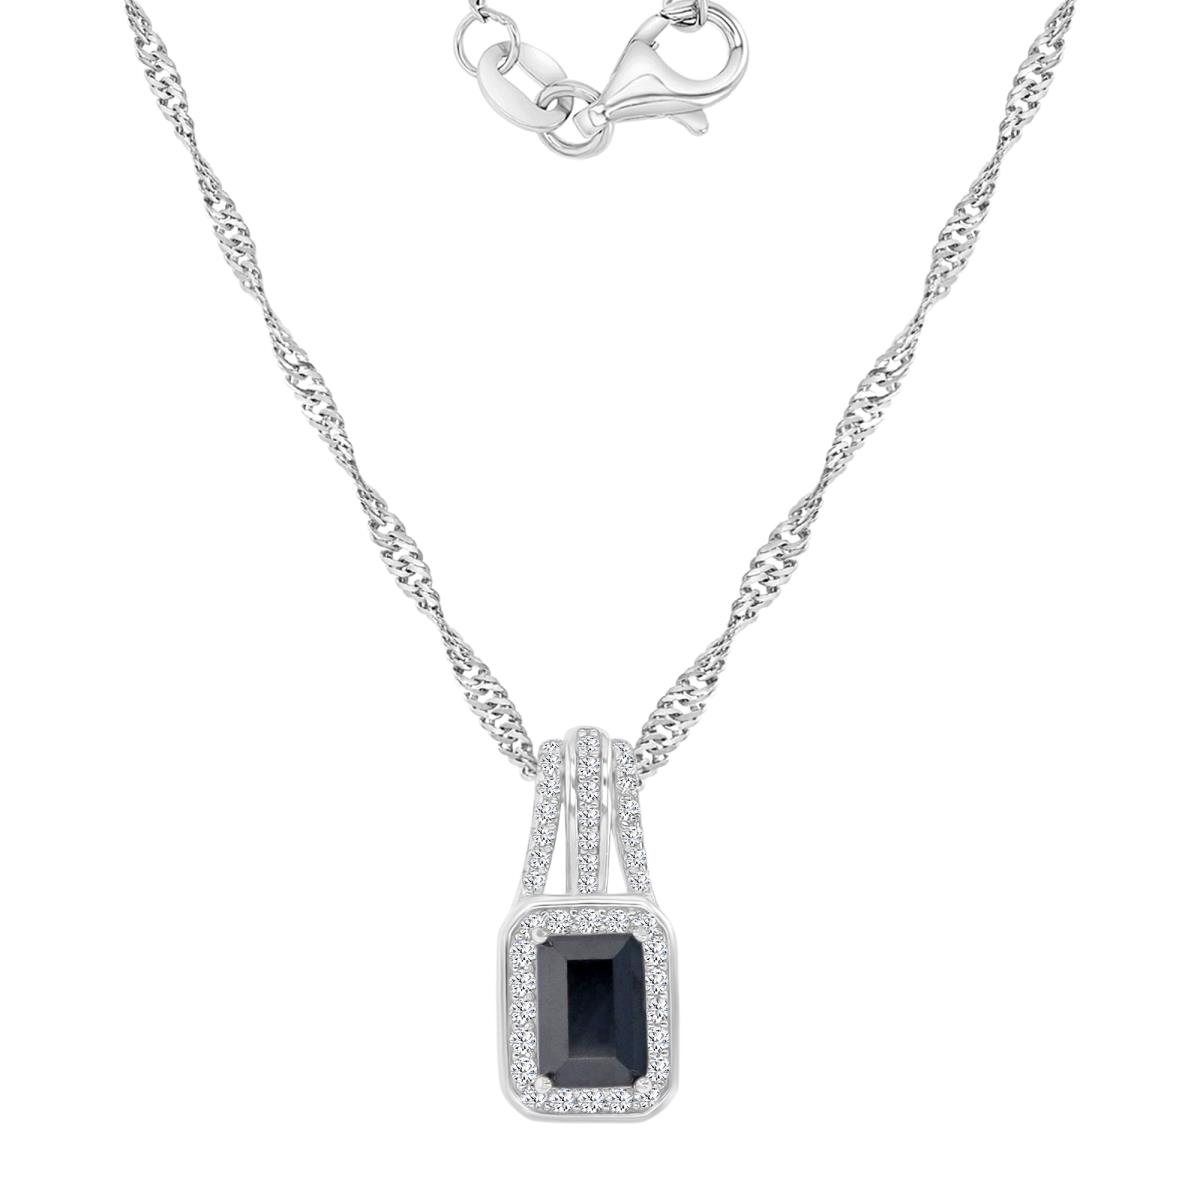 Sterling Silver Rhodium 18X8.3MM Polished Black Spinel & Cr White Sapphire Emerald Cut Dangling Pendant Singapore Chain 18+2" Necklace